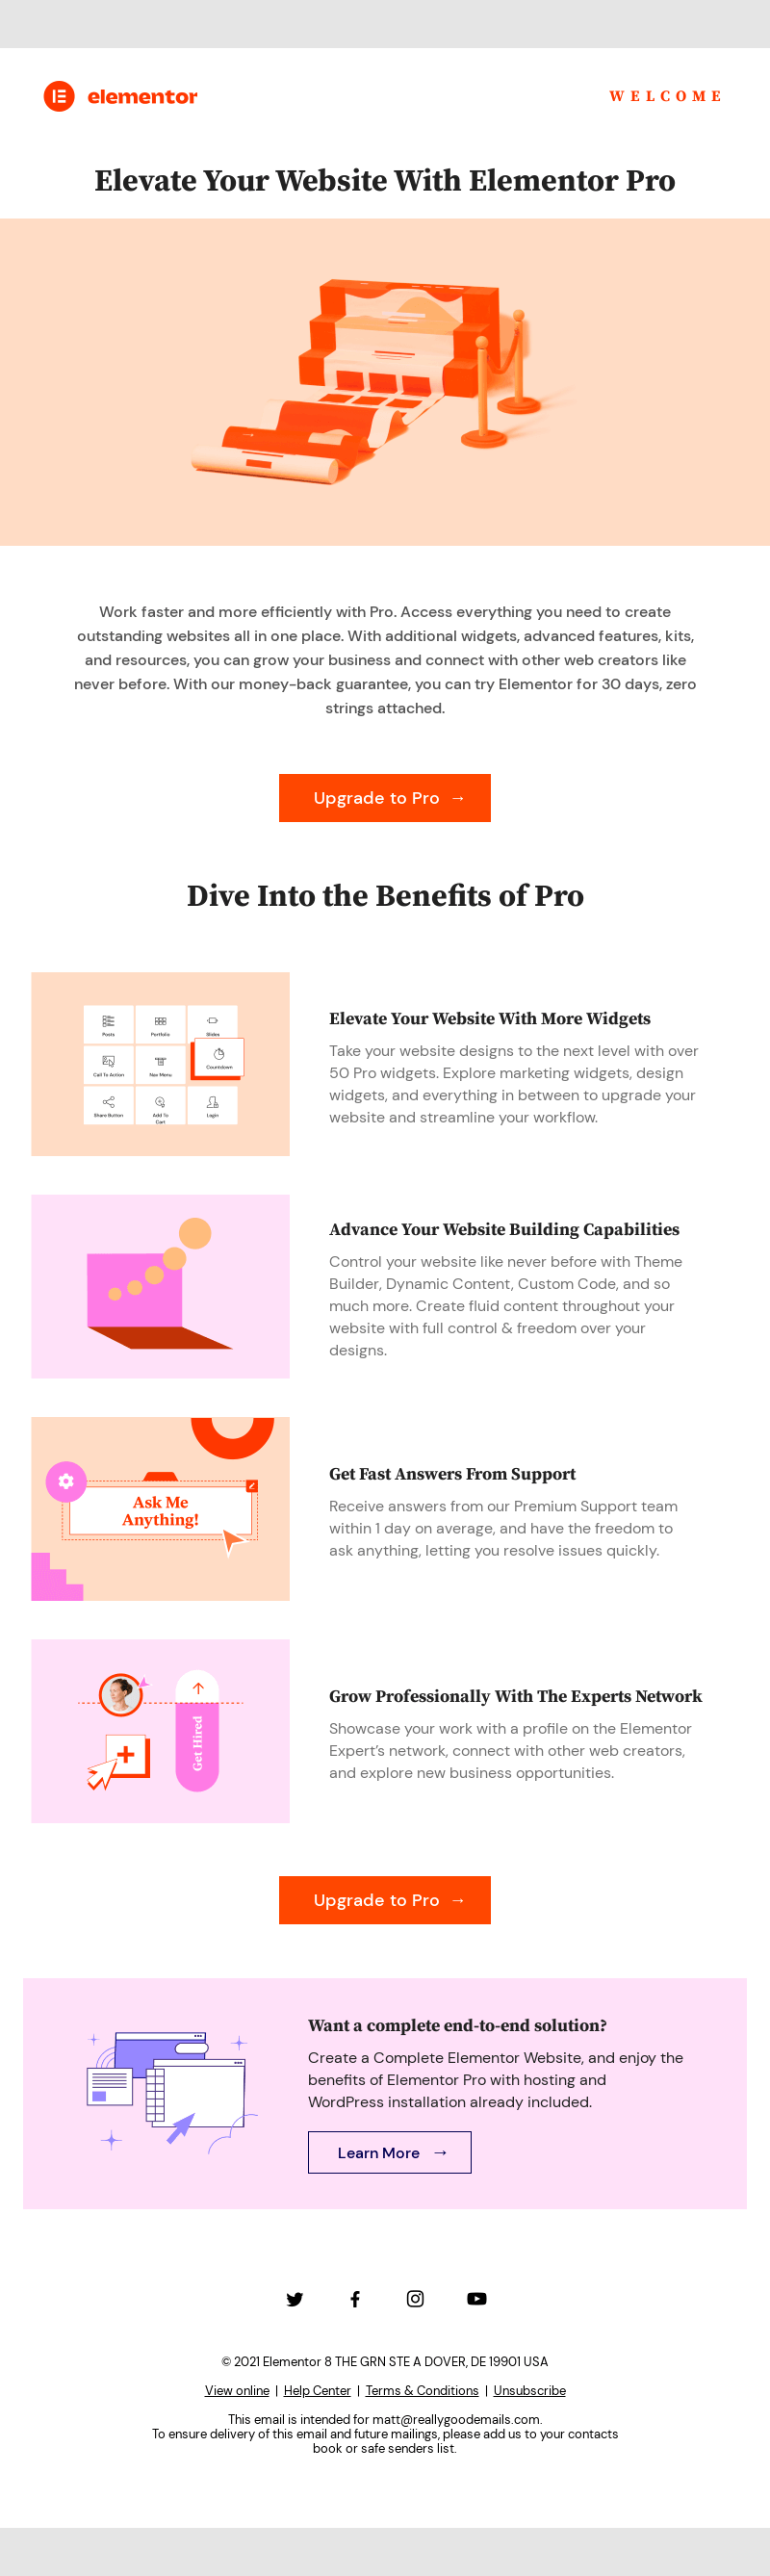 Onboarding email example